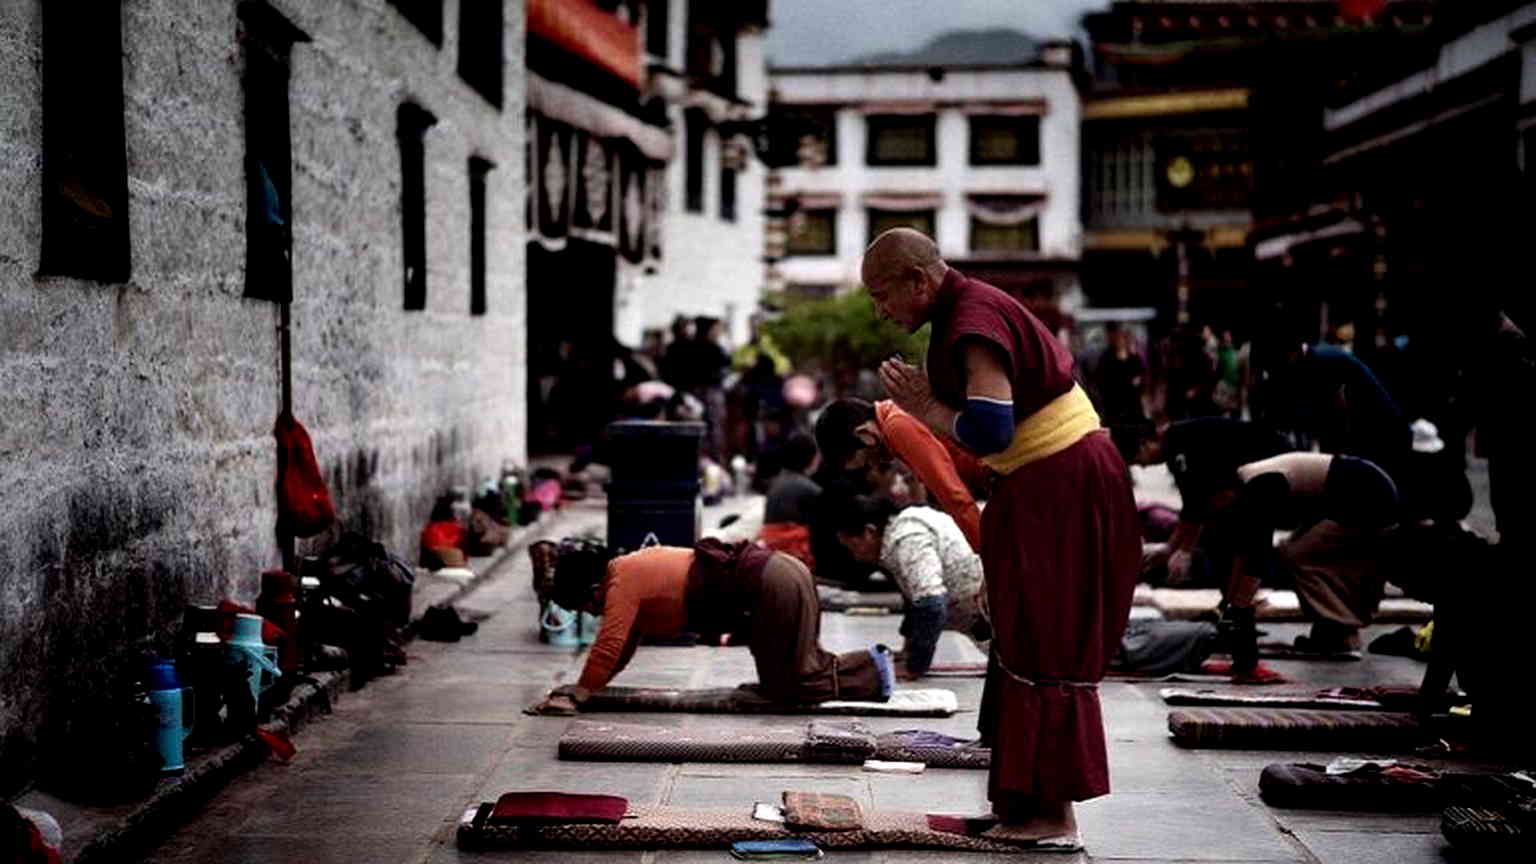 Chinese academics want to ‘reconstruct’ Tibet’s global image by using its Chinese name instead